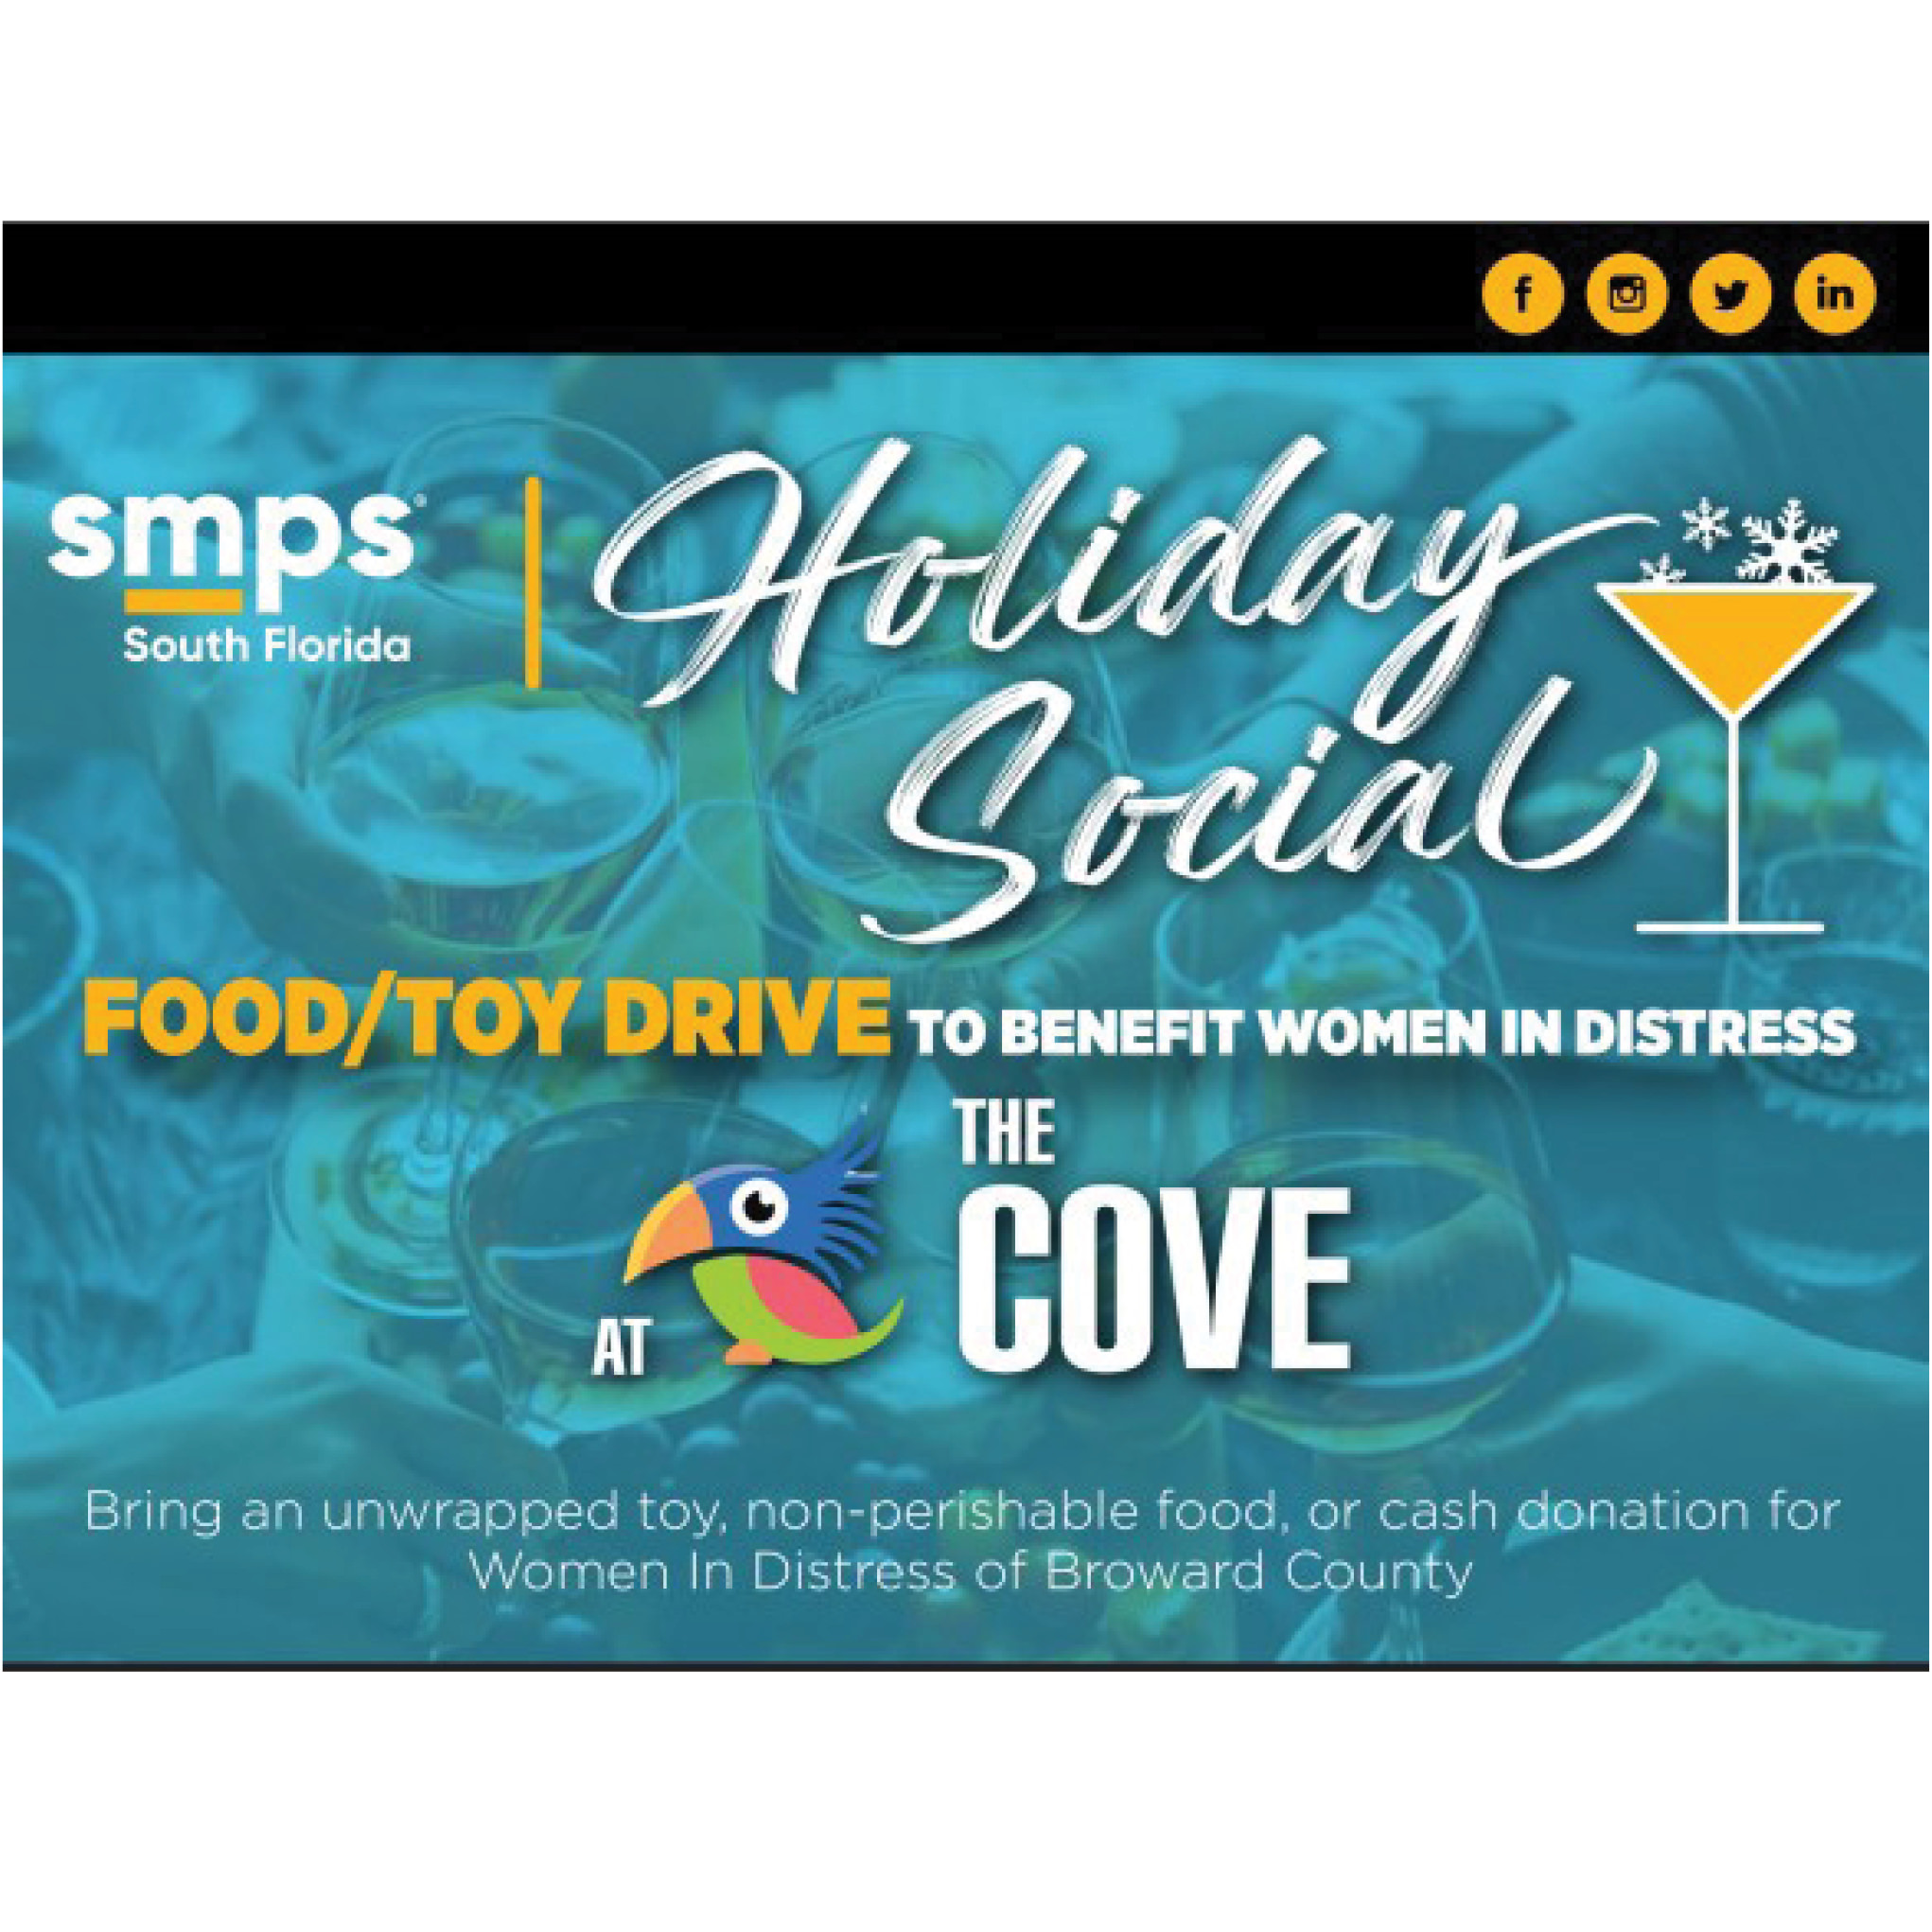 SMPS South Florida Holiday Social and Food/Toy Drive